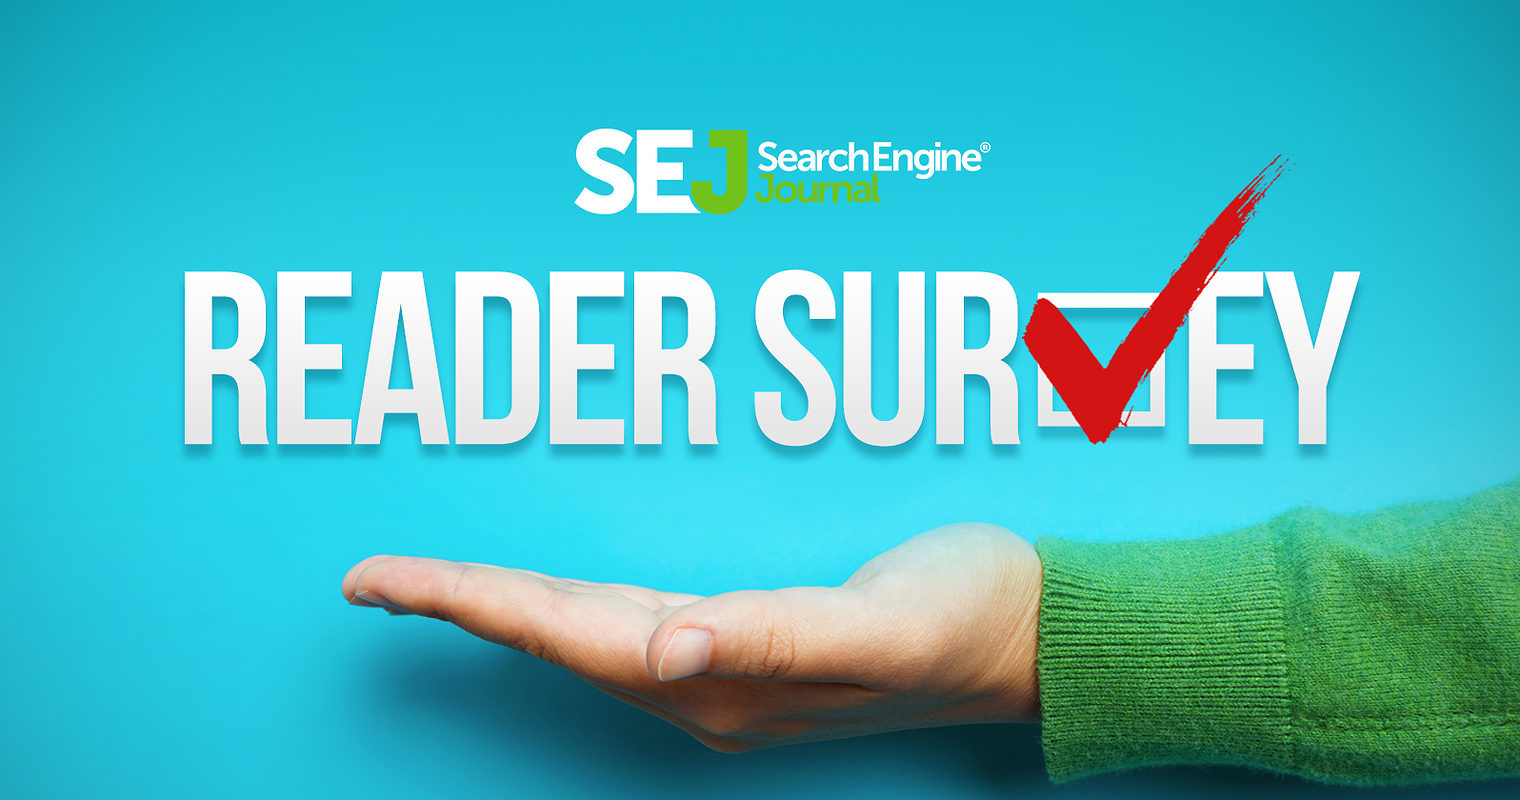 Please Take the Search Engine Journal Reader Survey